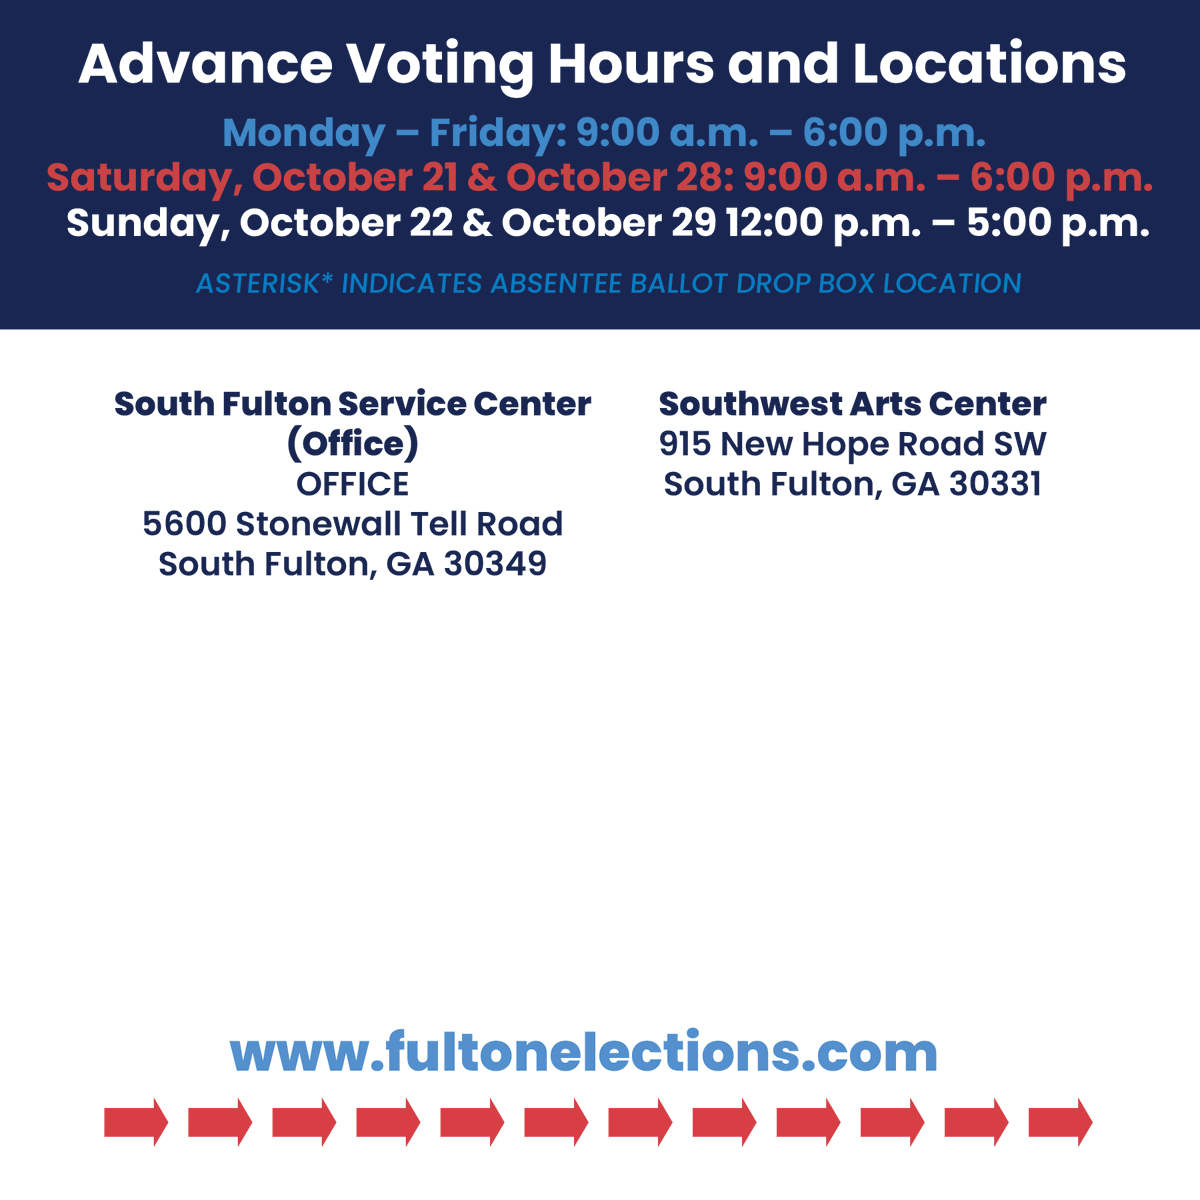 Heads up, Union City! Early voting begins Monday, October 16 through Friday, November 3. Beat the lines on Election Day, November 7, and cast your vote! Want to learn more? Visit fultonelections.com.

#UnionCityVotes #FultonVotes #EarlyVoting #VoteYourVoice